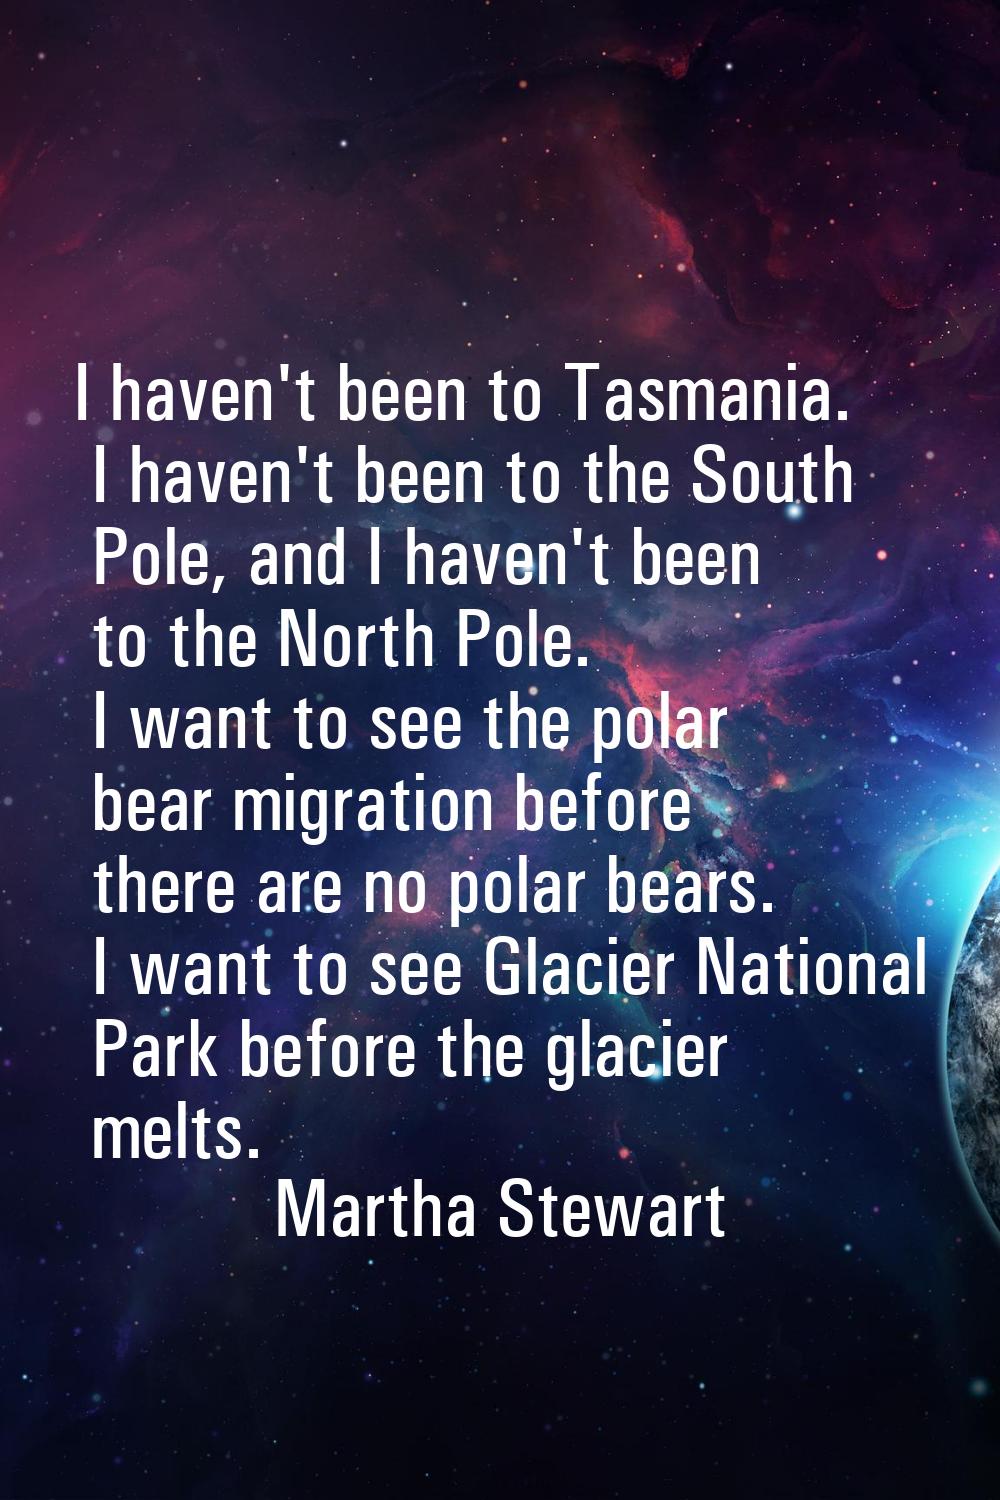 I haven't been to Tasmania. I haven't been to the South Pole, and I haven't been to the North Pole.